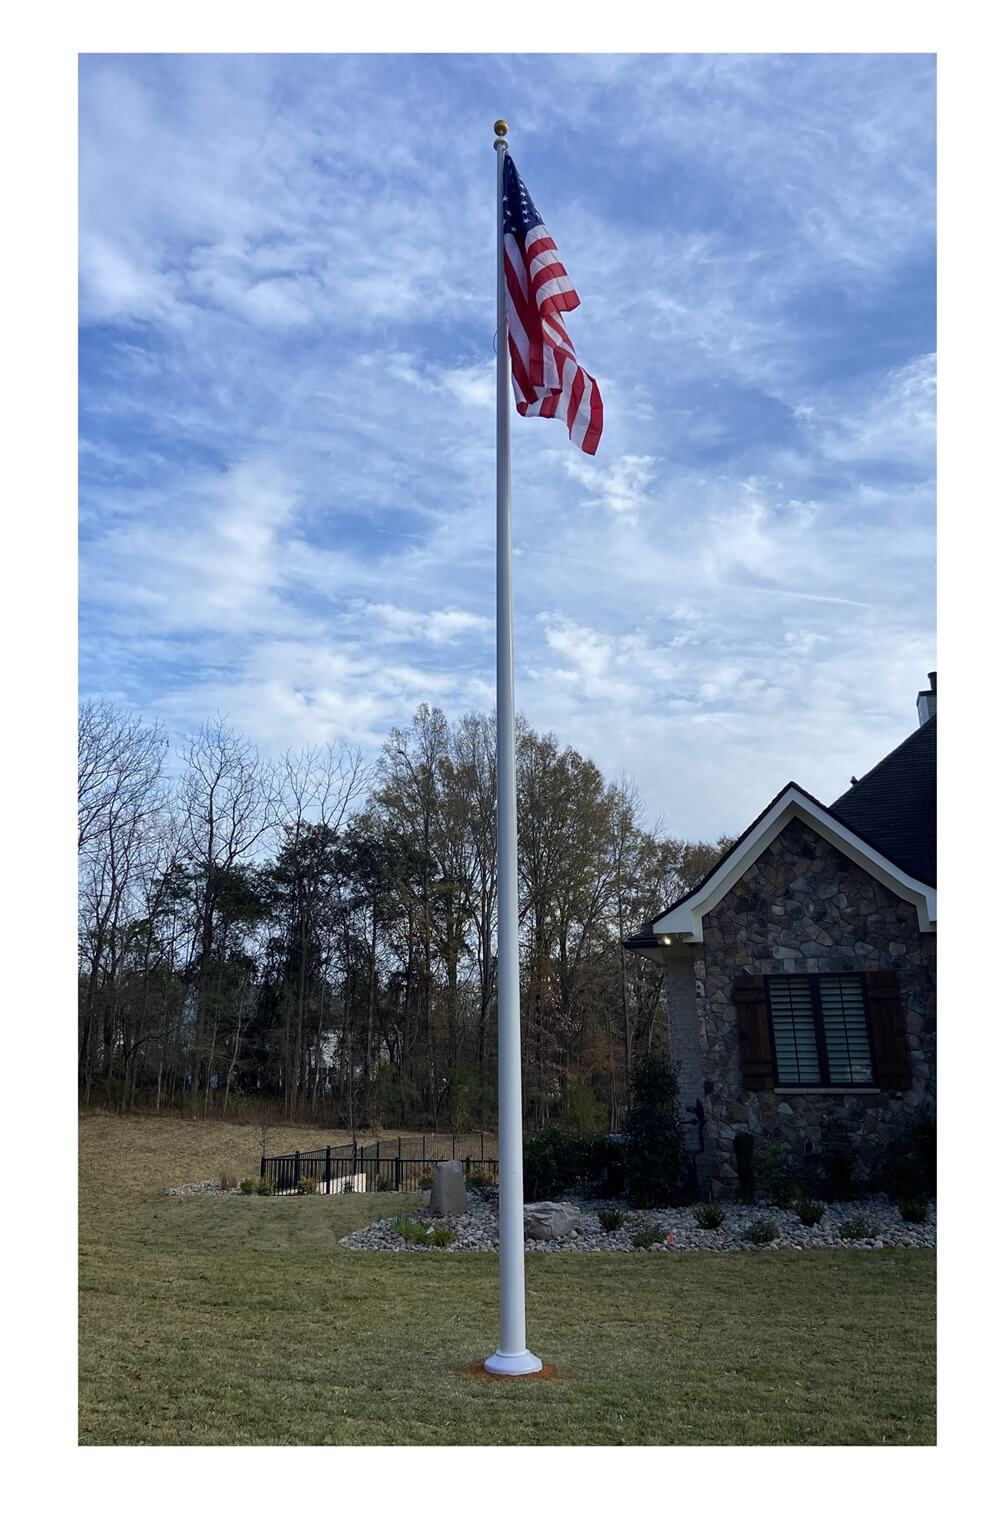 Deluxe Fiberglass Flagpole Ground Set External Halyard. Made in the USA